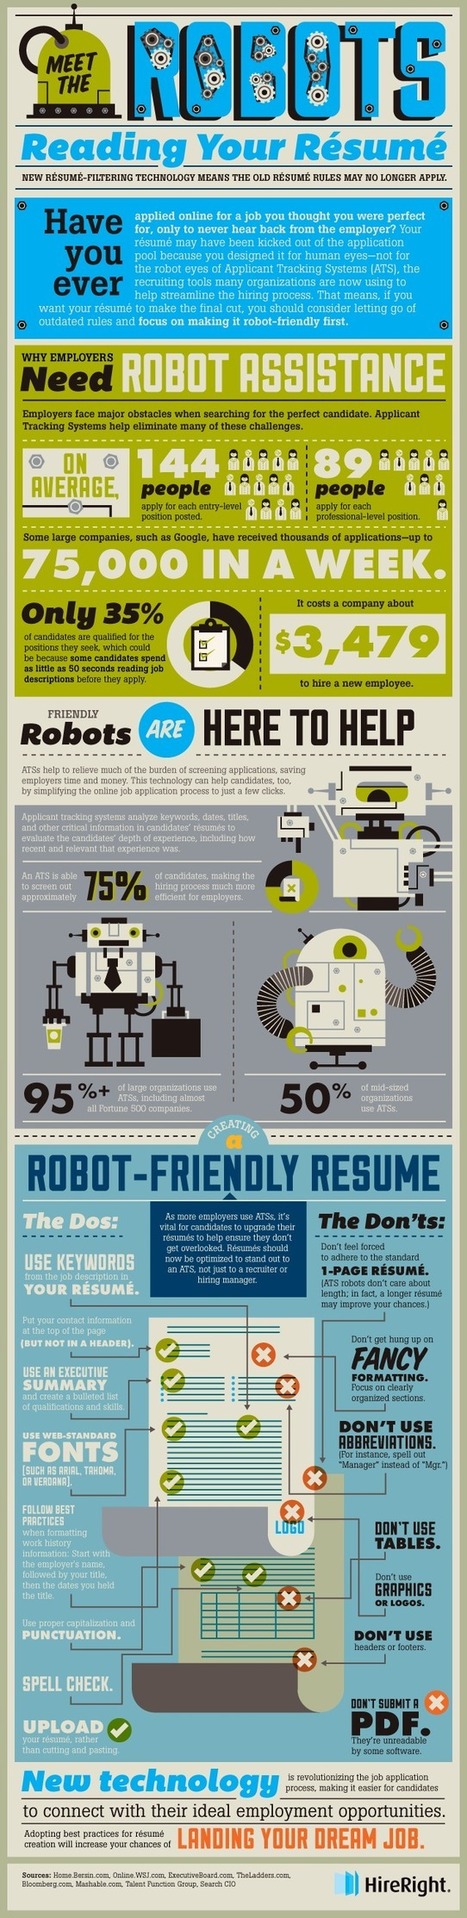 How to Create A Robot-Friendly Résumé to Land Your Dream Job | digital marketing strategy | Scoop.it